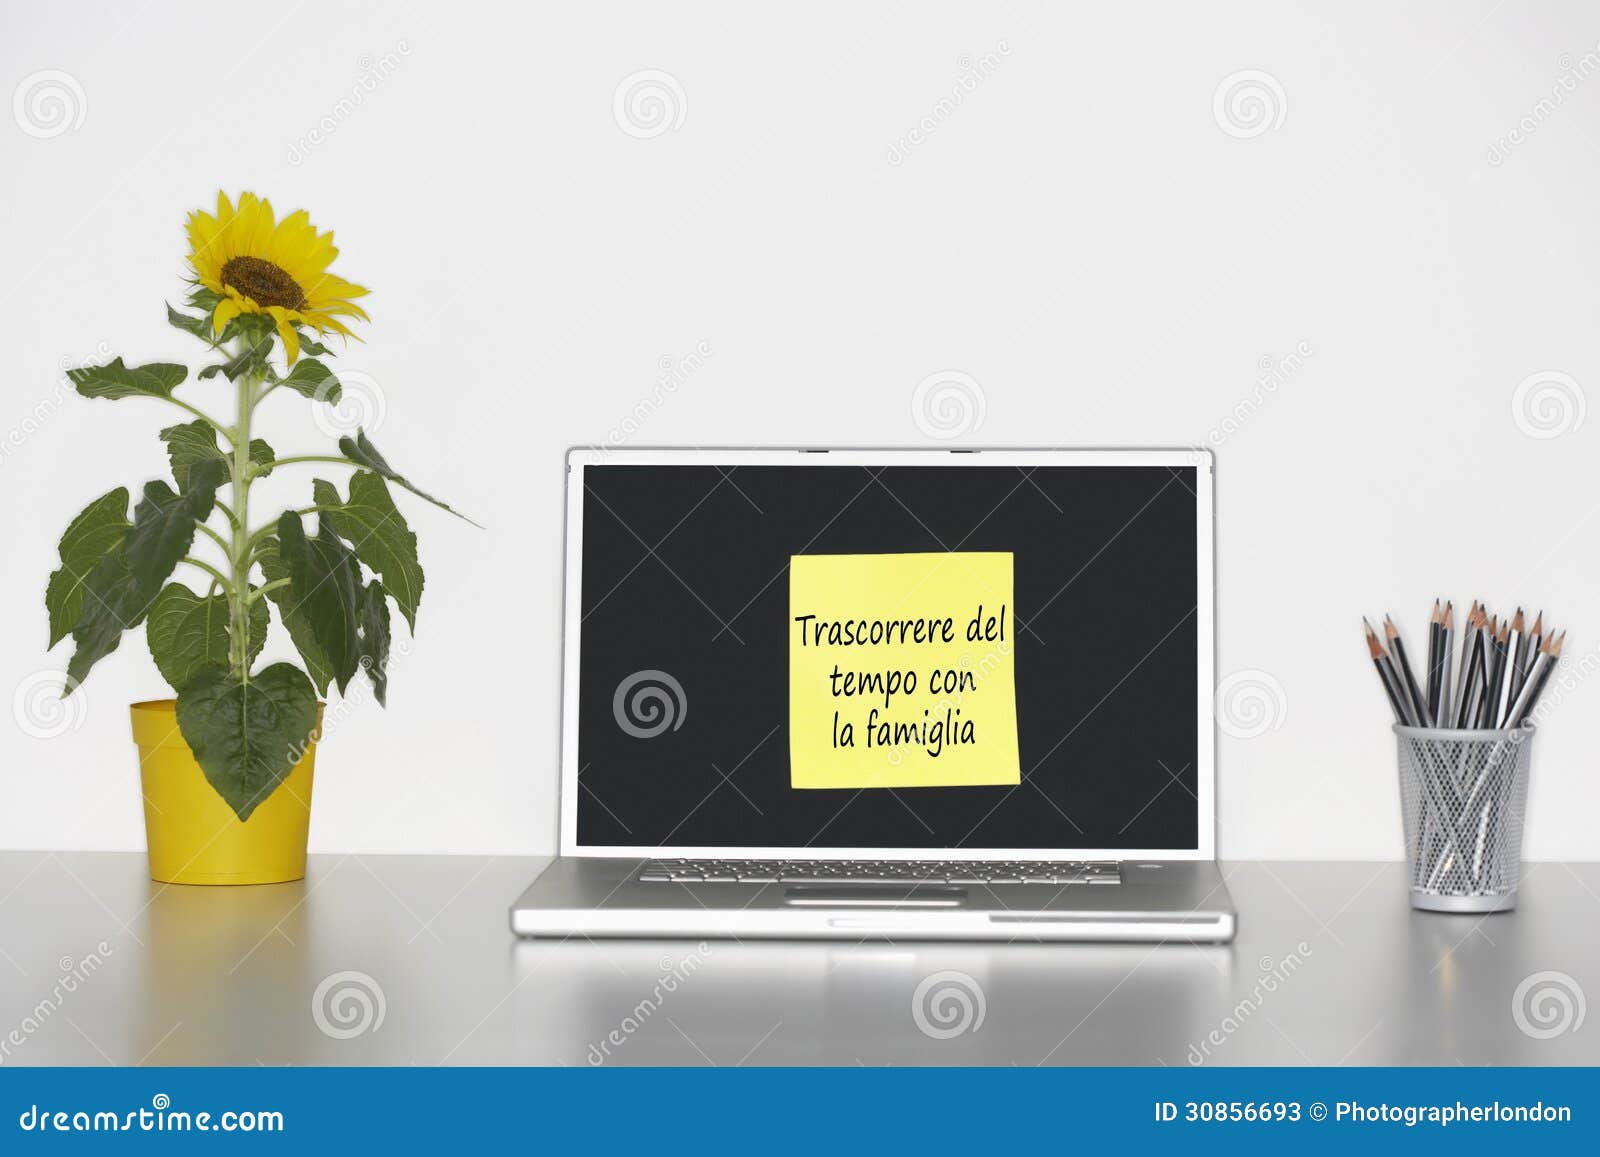 sunflower plant on desk and sticky notepaper with italian text on laptop screen saying trascorrere del tempo con la famiglia